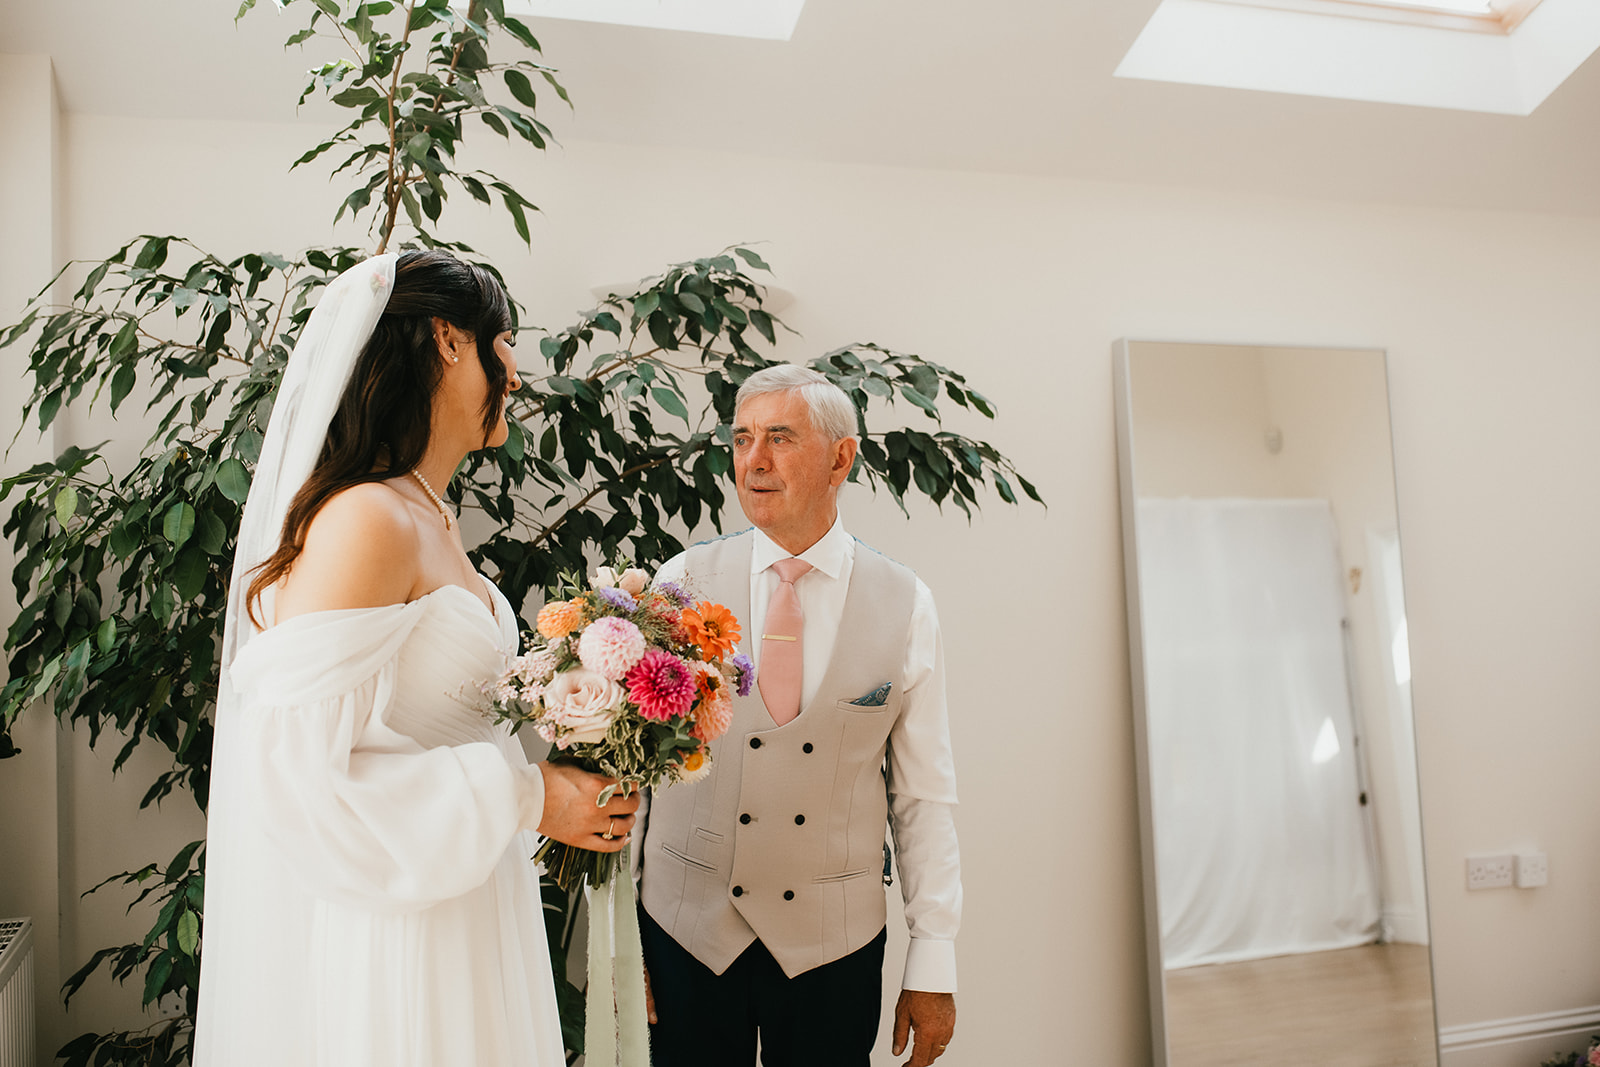 The bride and her father 